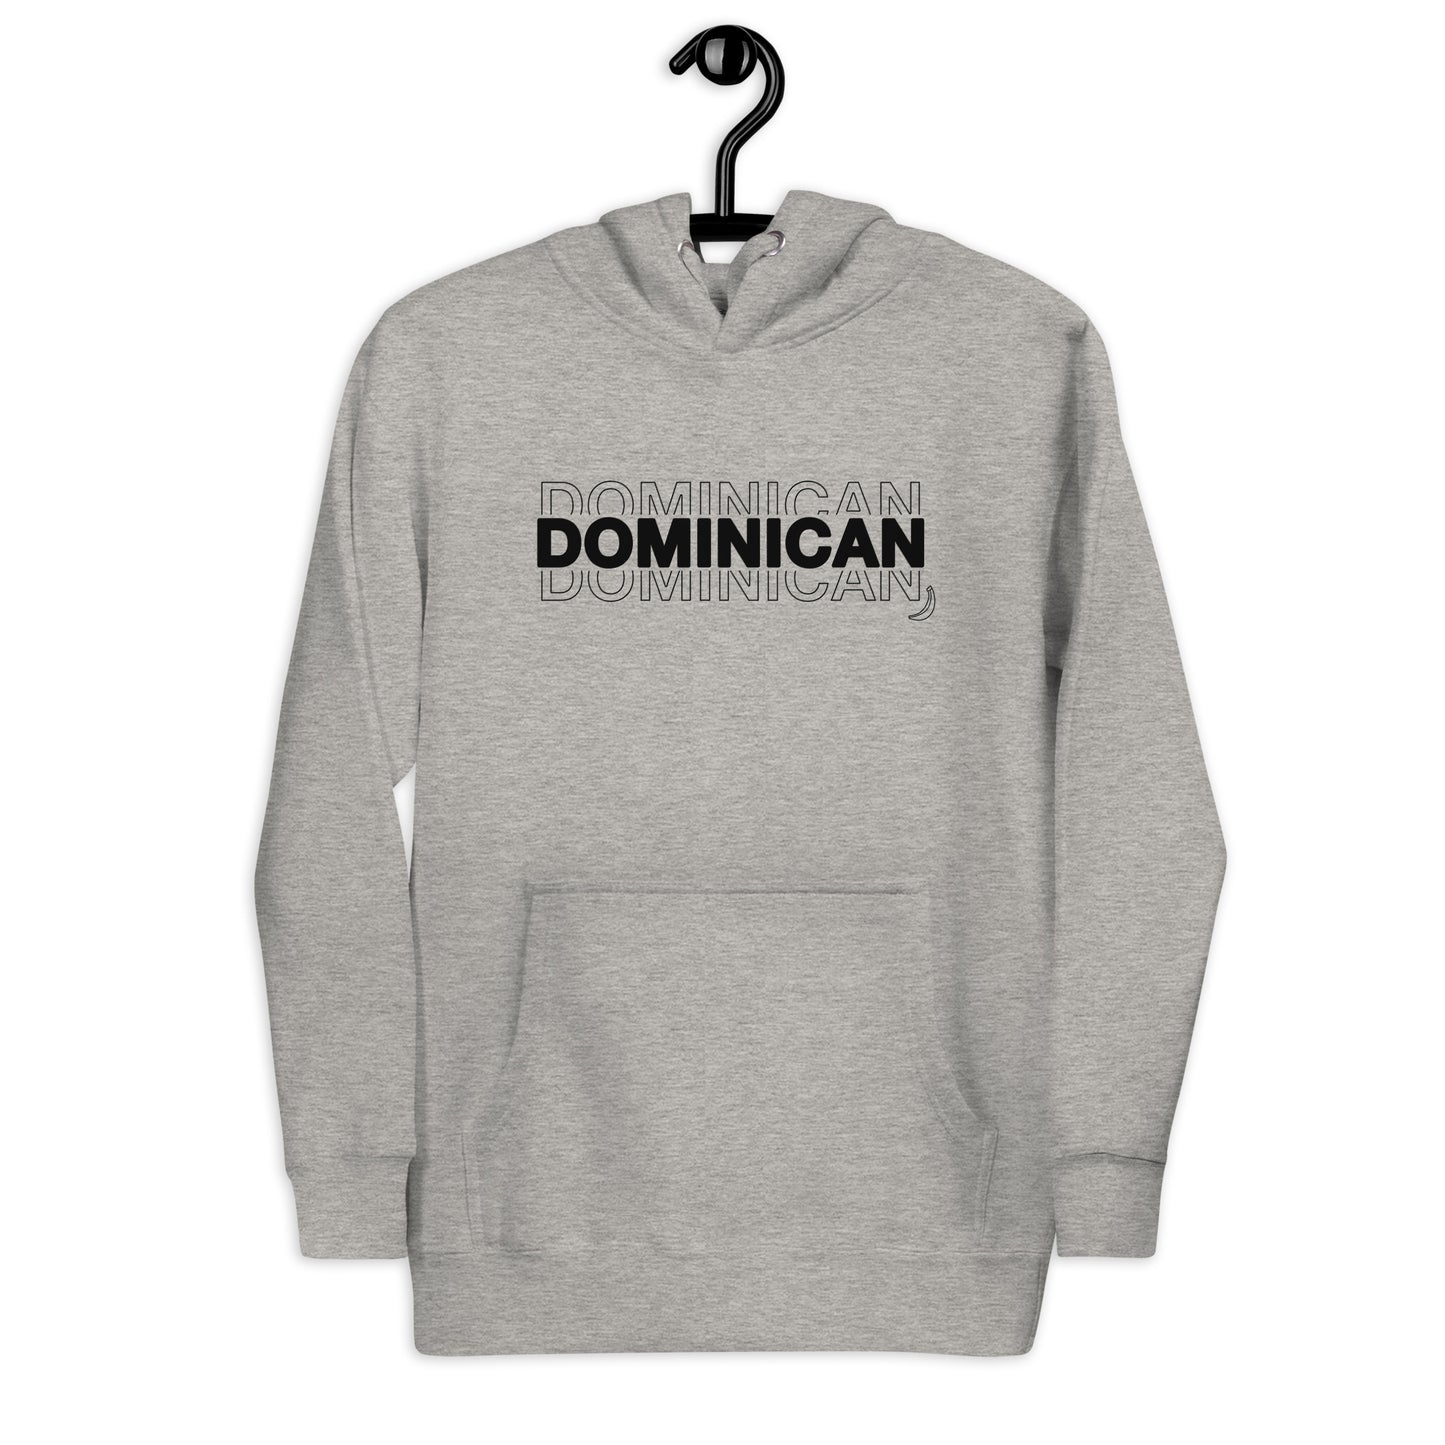 KeCaché Minimalist 'Dominican' Hoodie - Proudly Represent Your Heritage